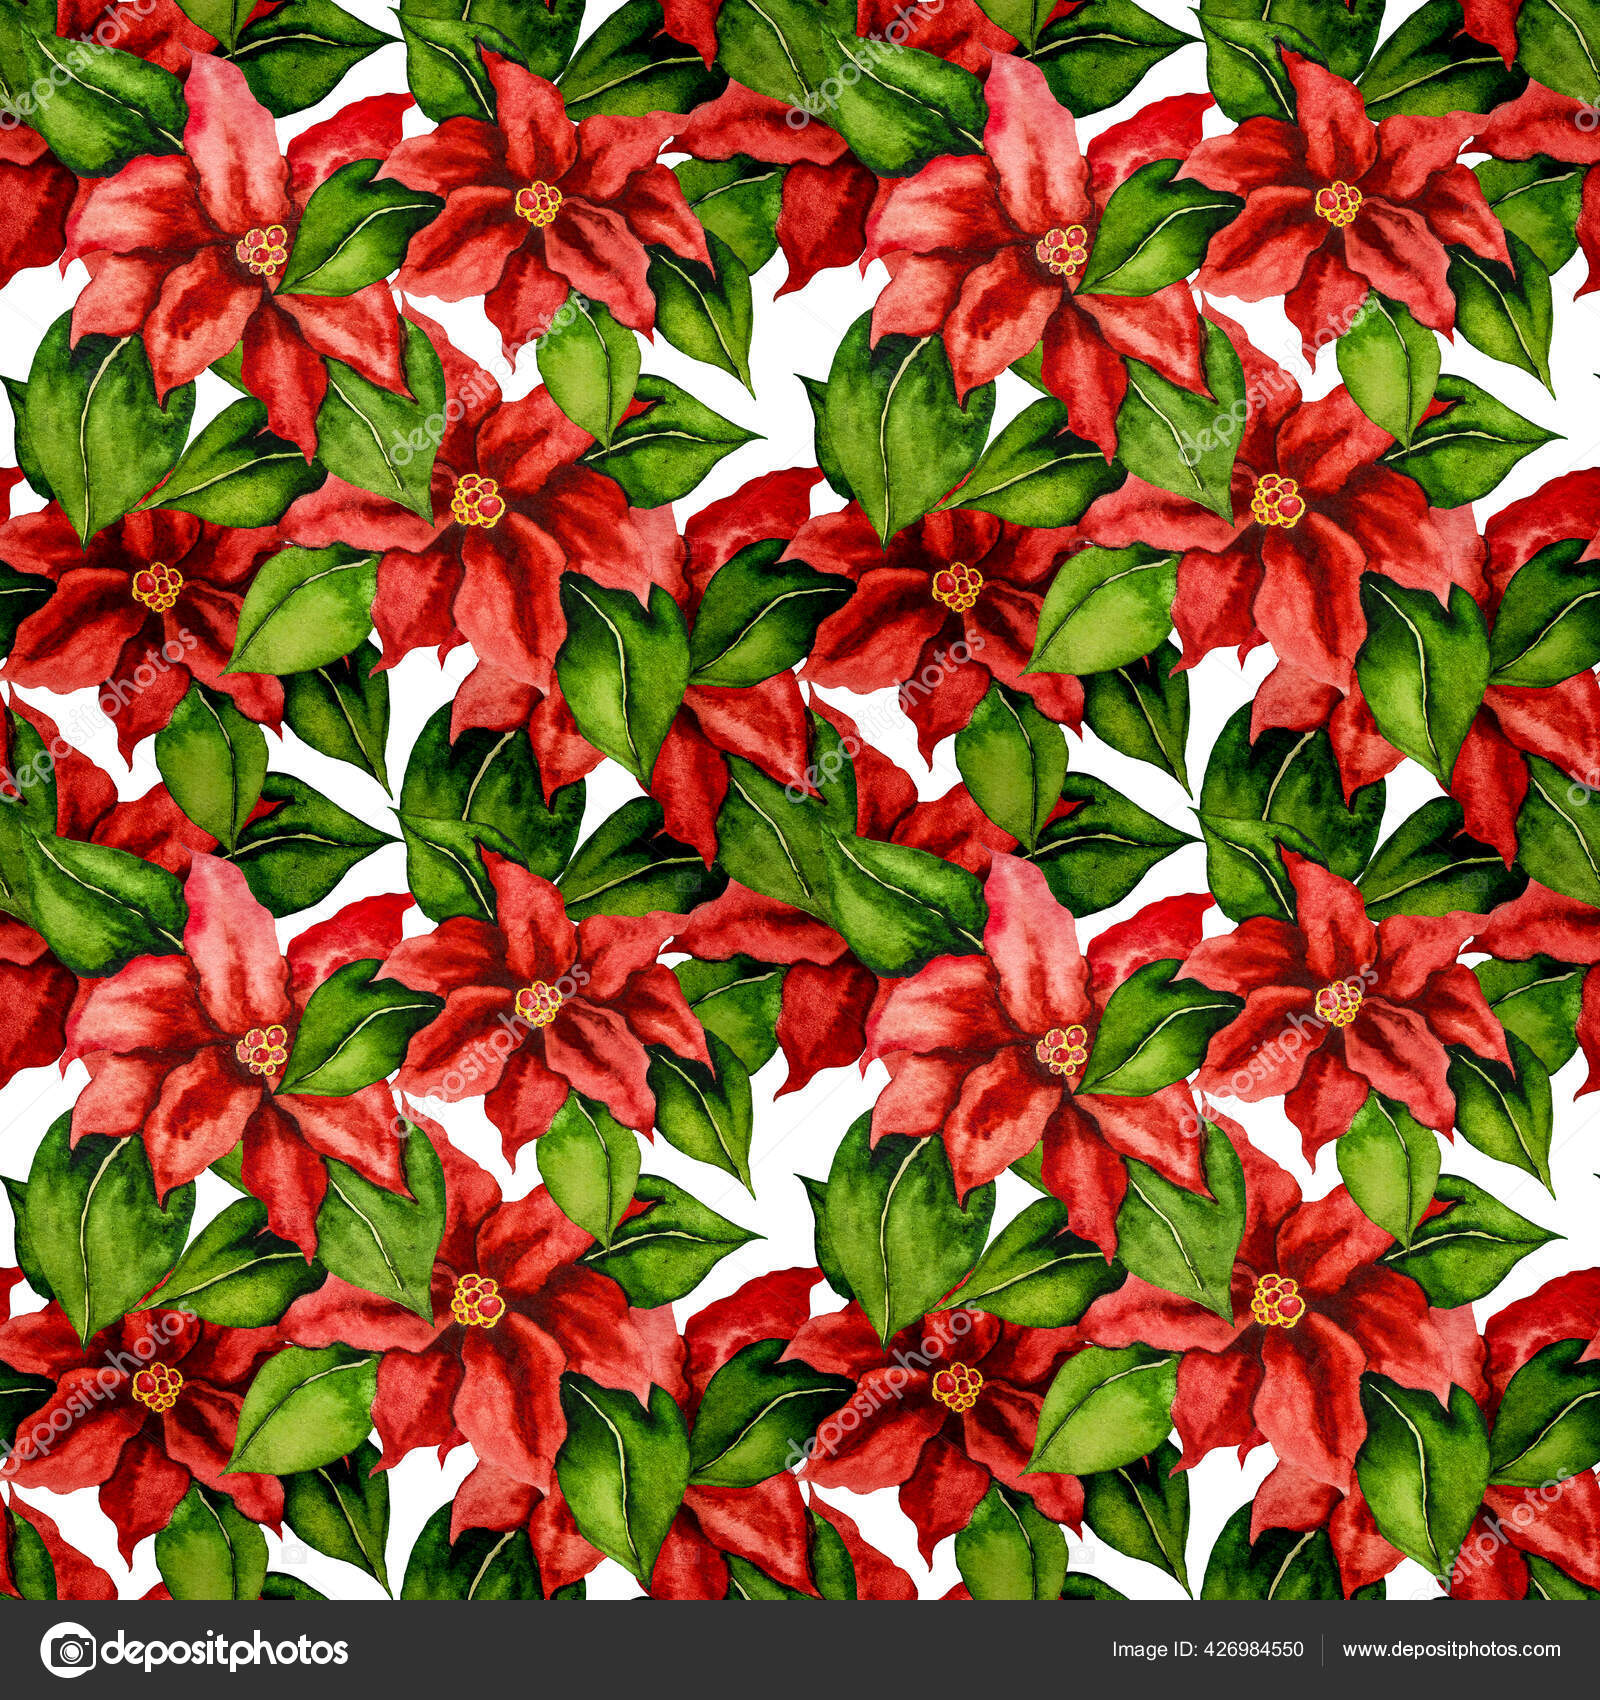 Poinsettia Wrapping Paper